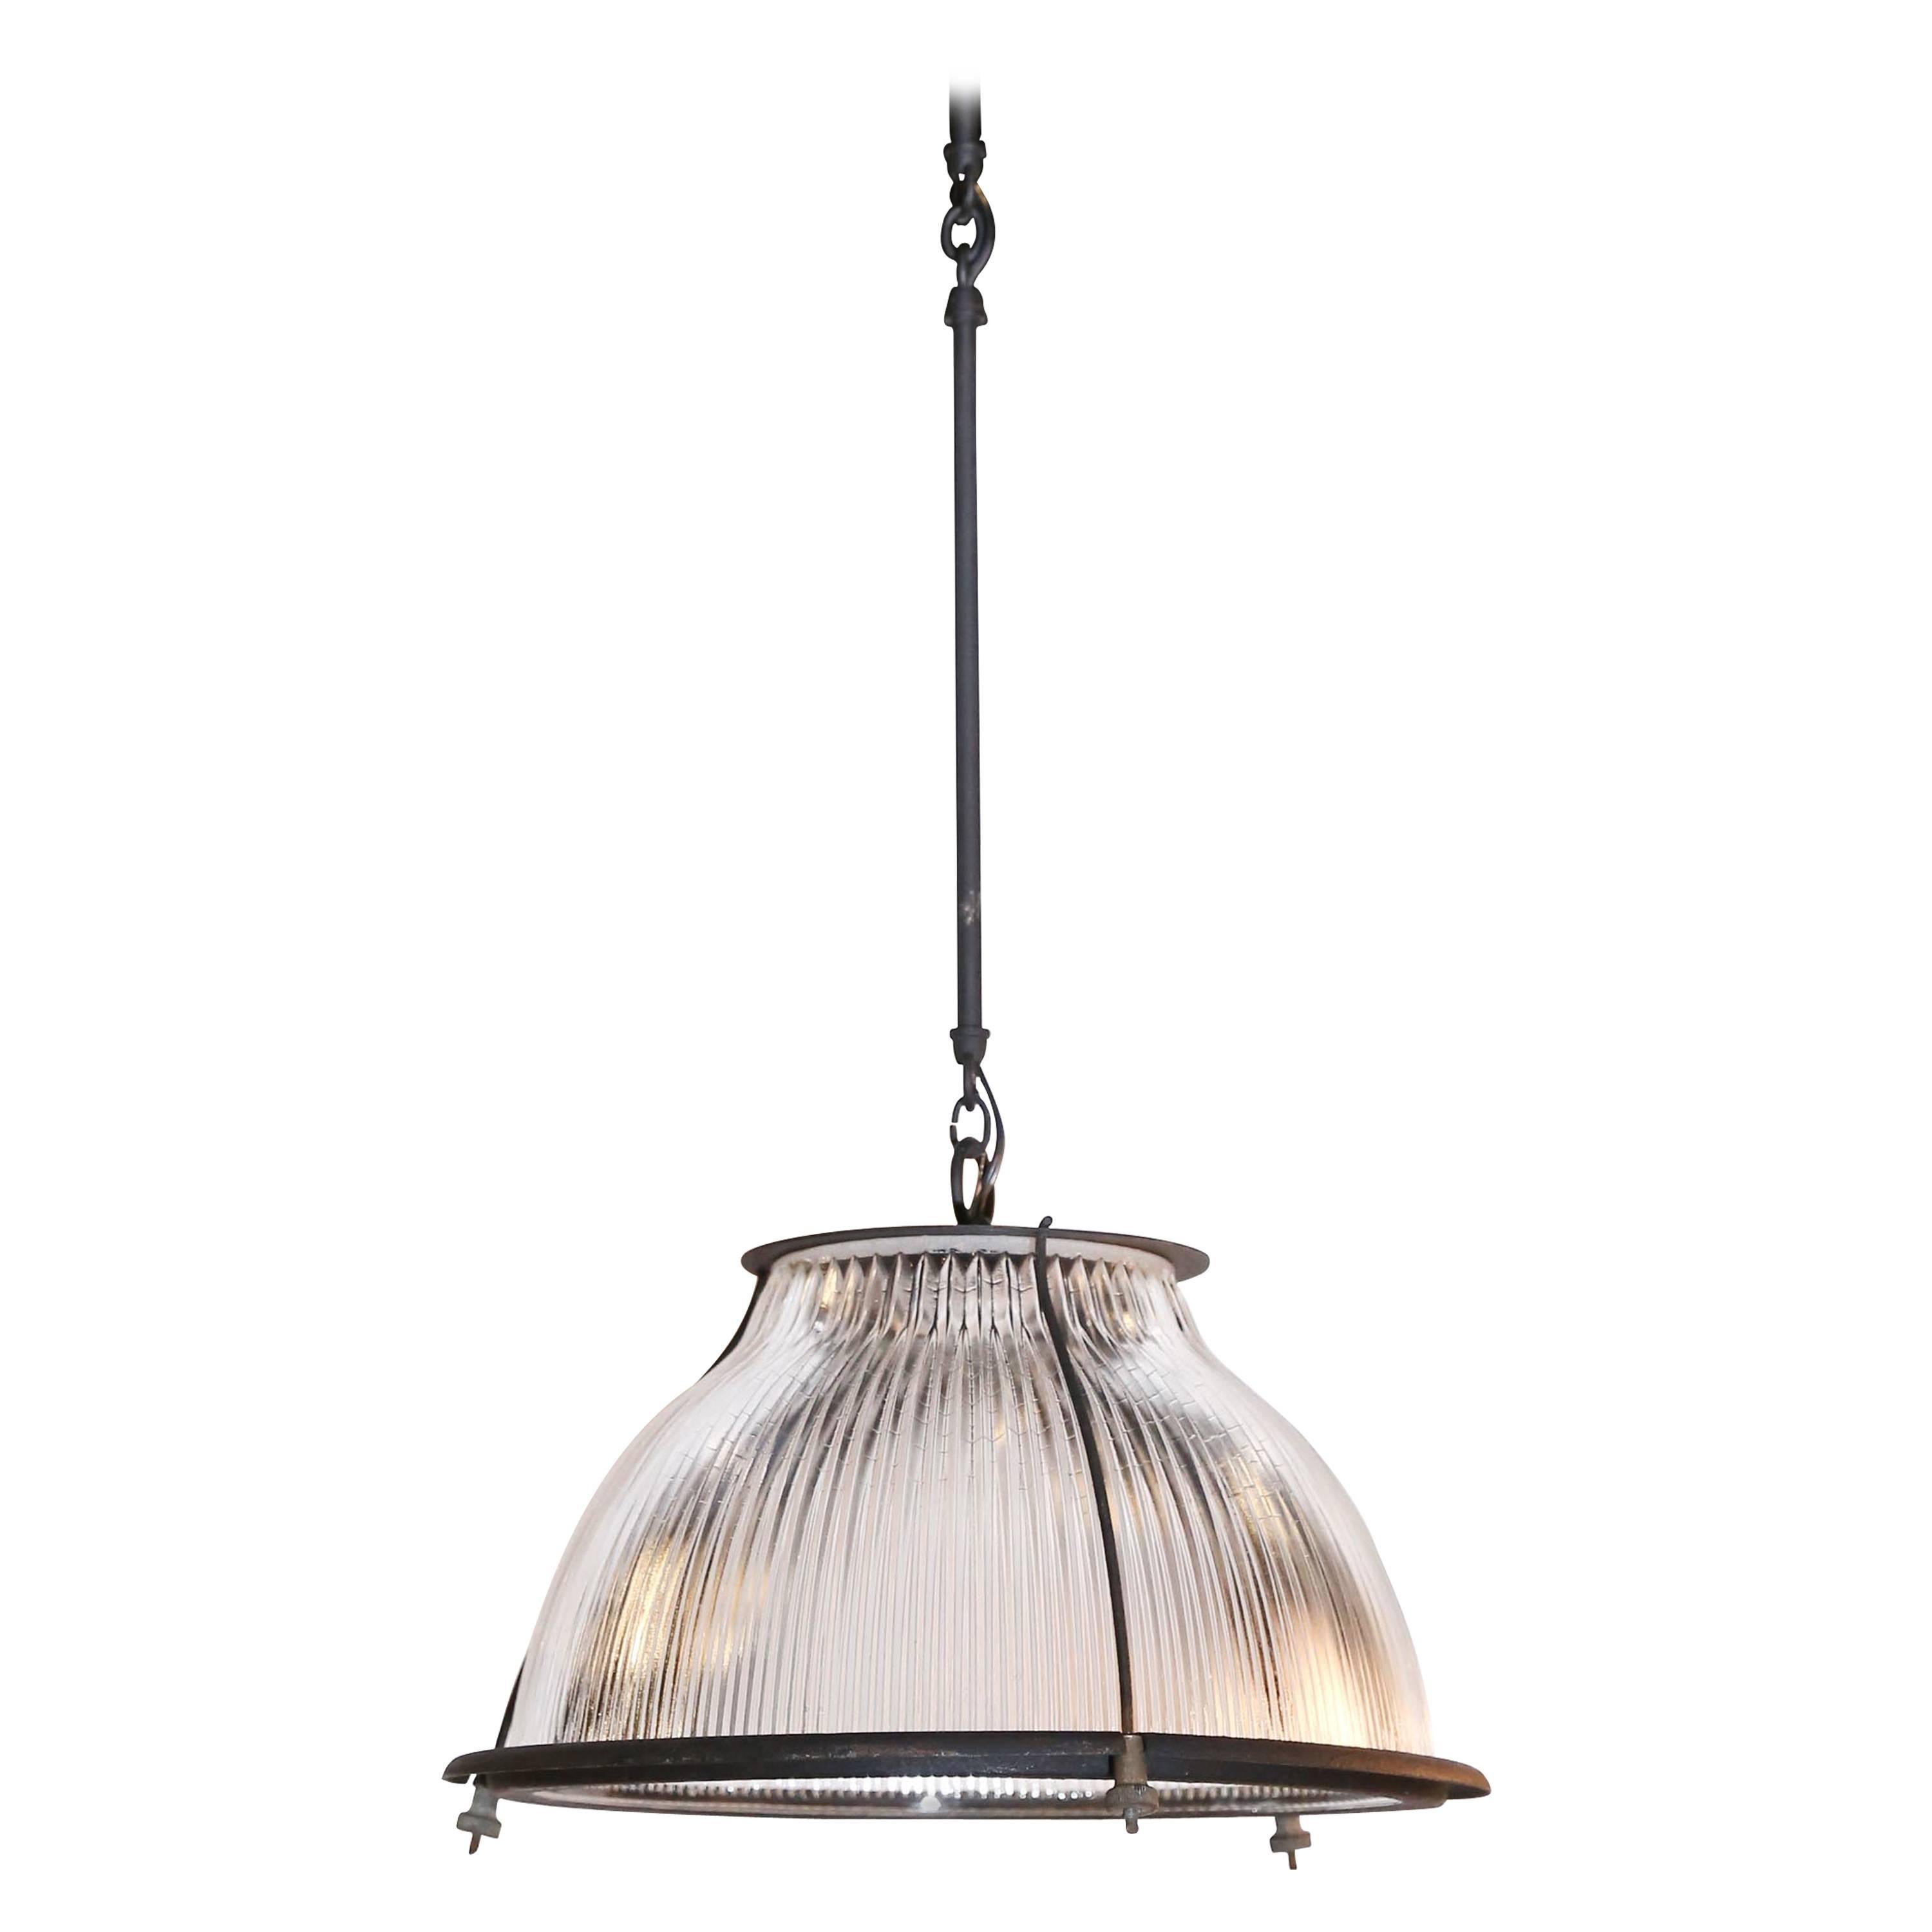 Glass and Metal Industrial Pendant Light Fixture For Sale